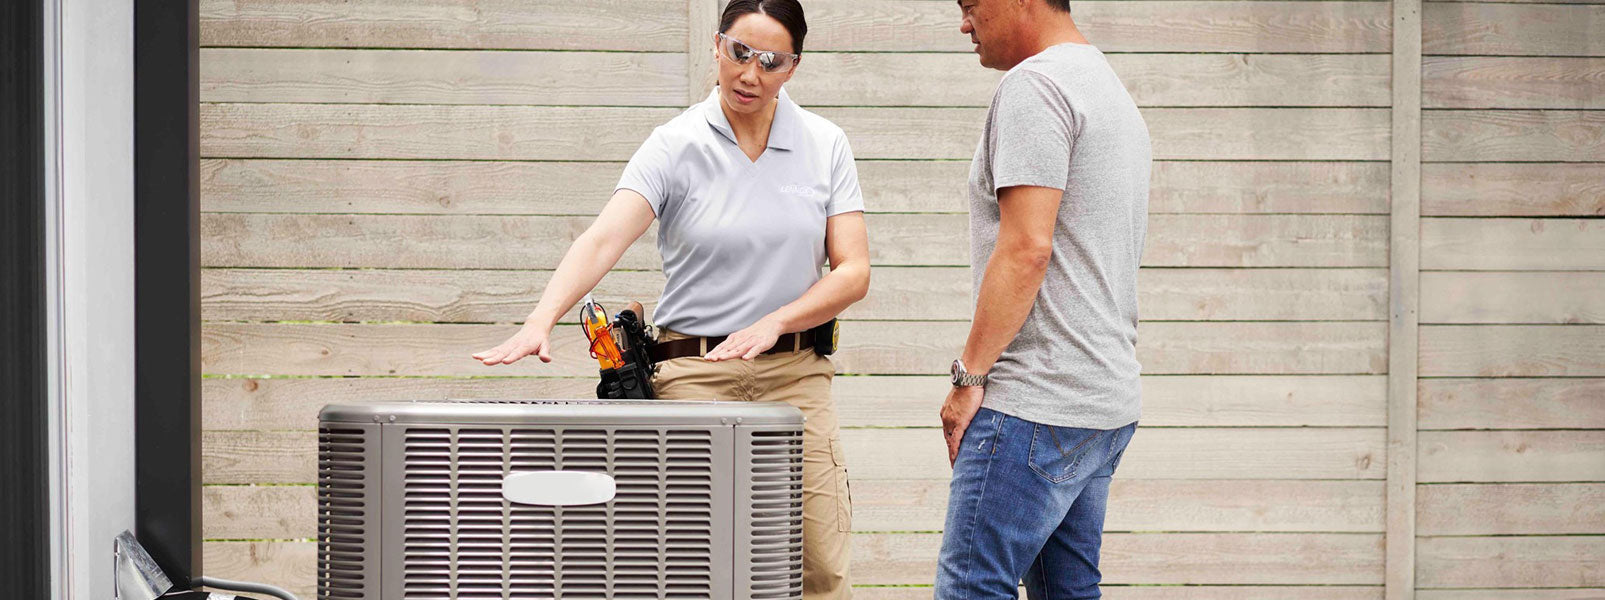 6 Things to Know About Electric Heat Pump Systems